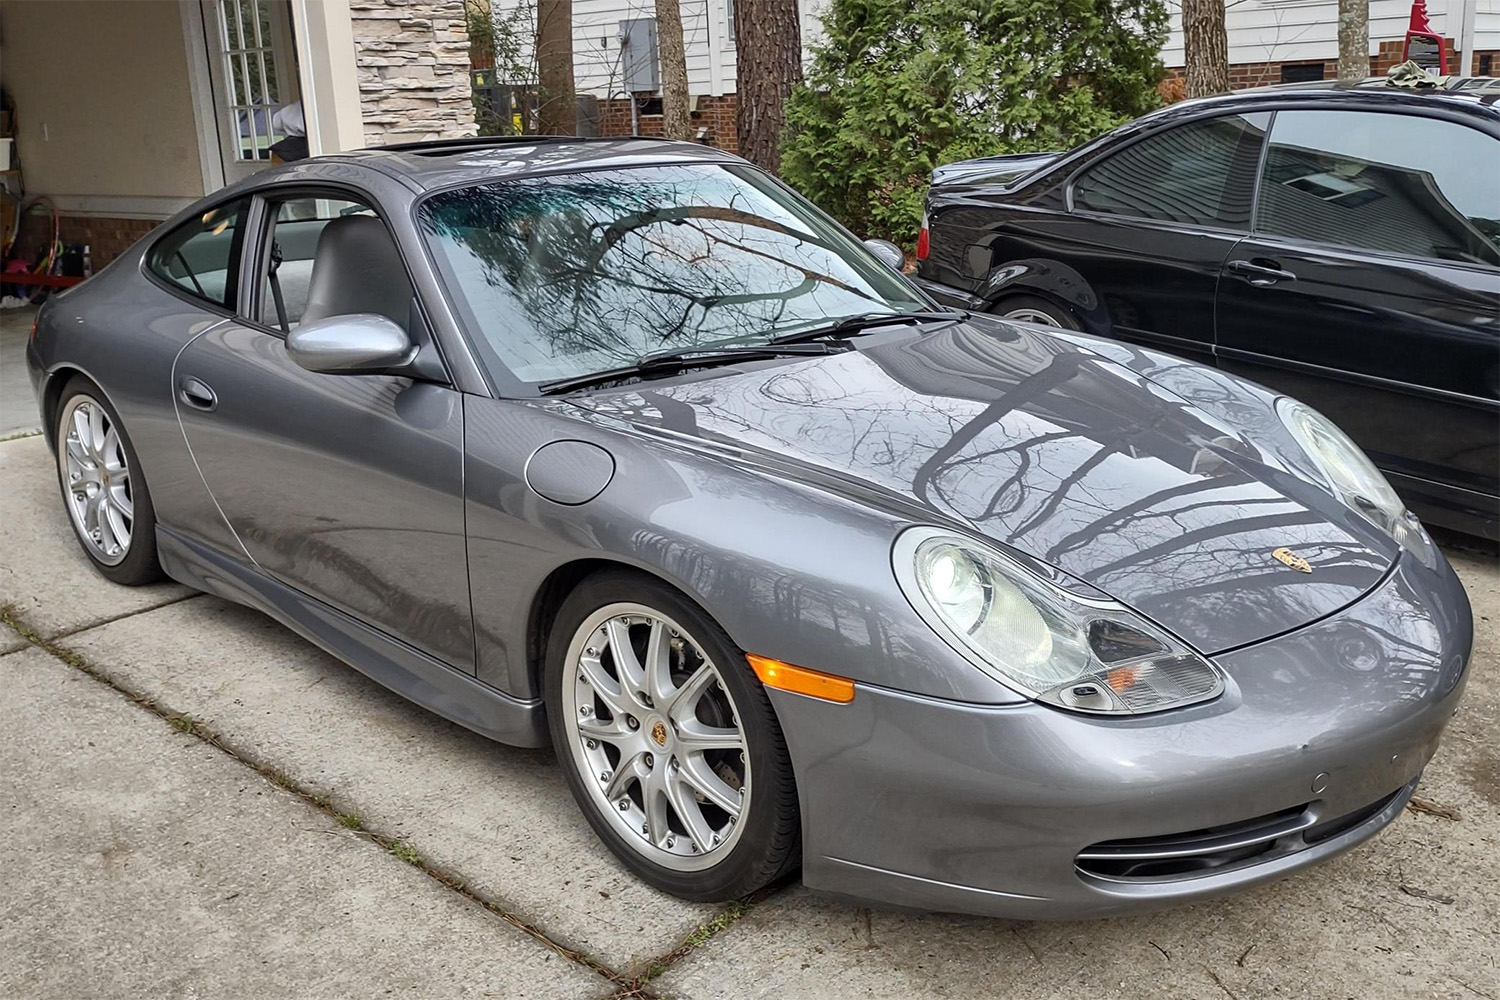 Silver 2001 Porsche 991 911 Carrera base with six-speed manual transmission, sport package, and technic package